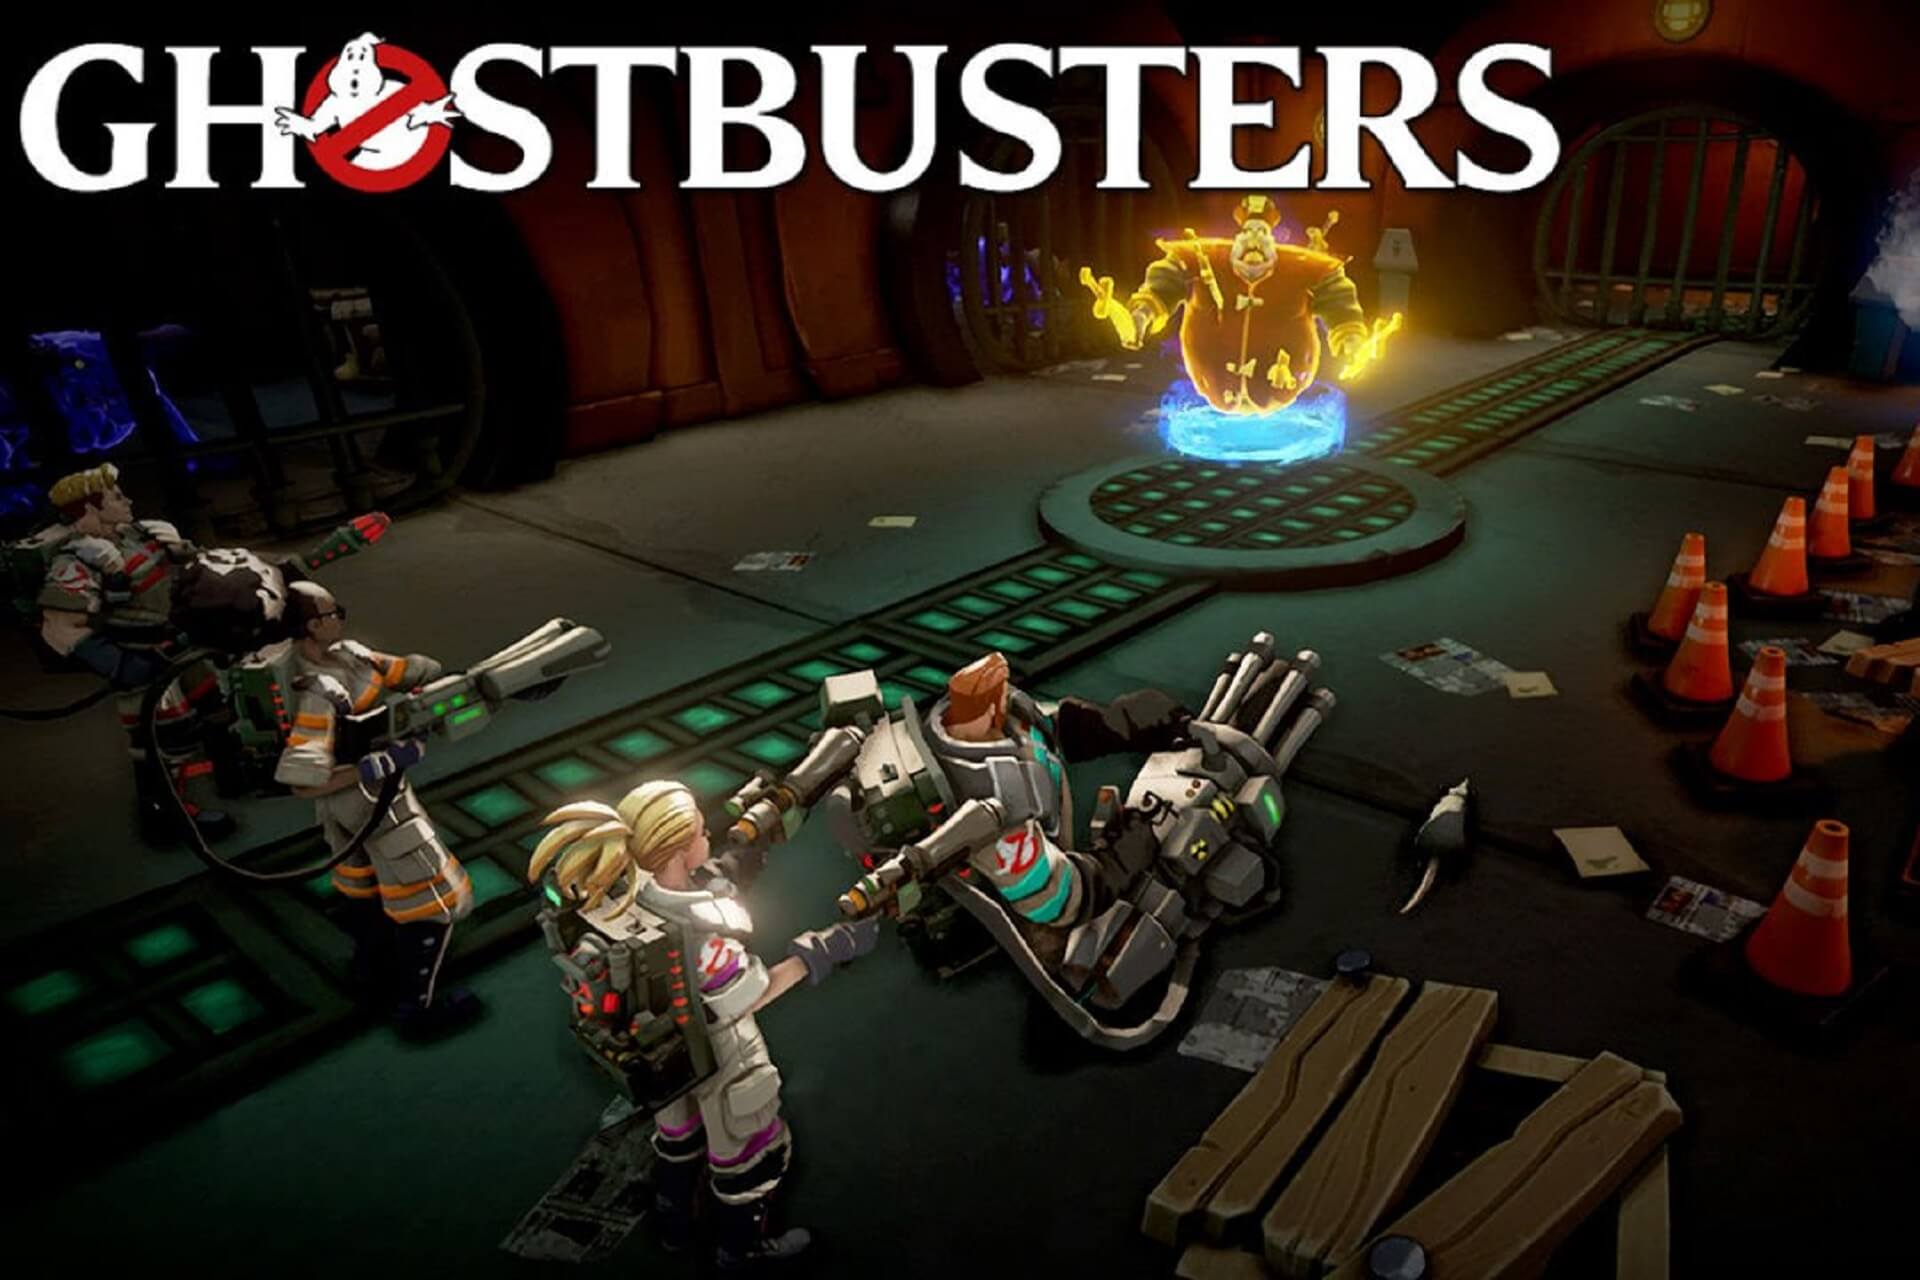 Ghostbusters game multiplayer DLC